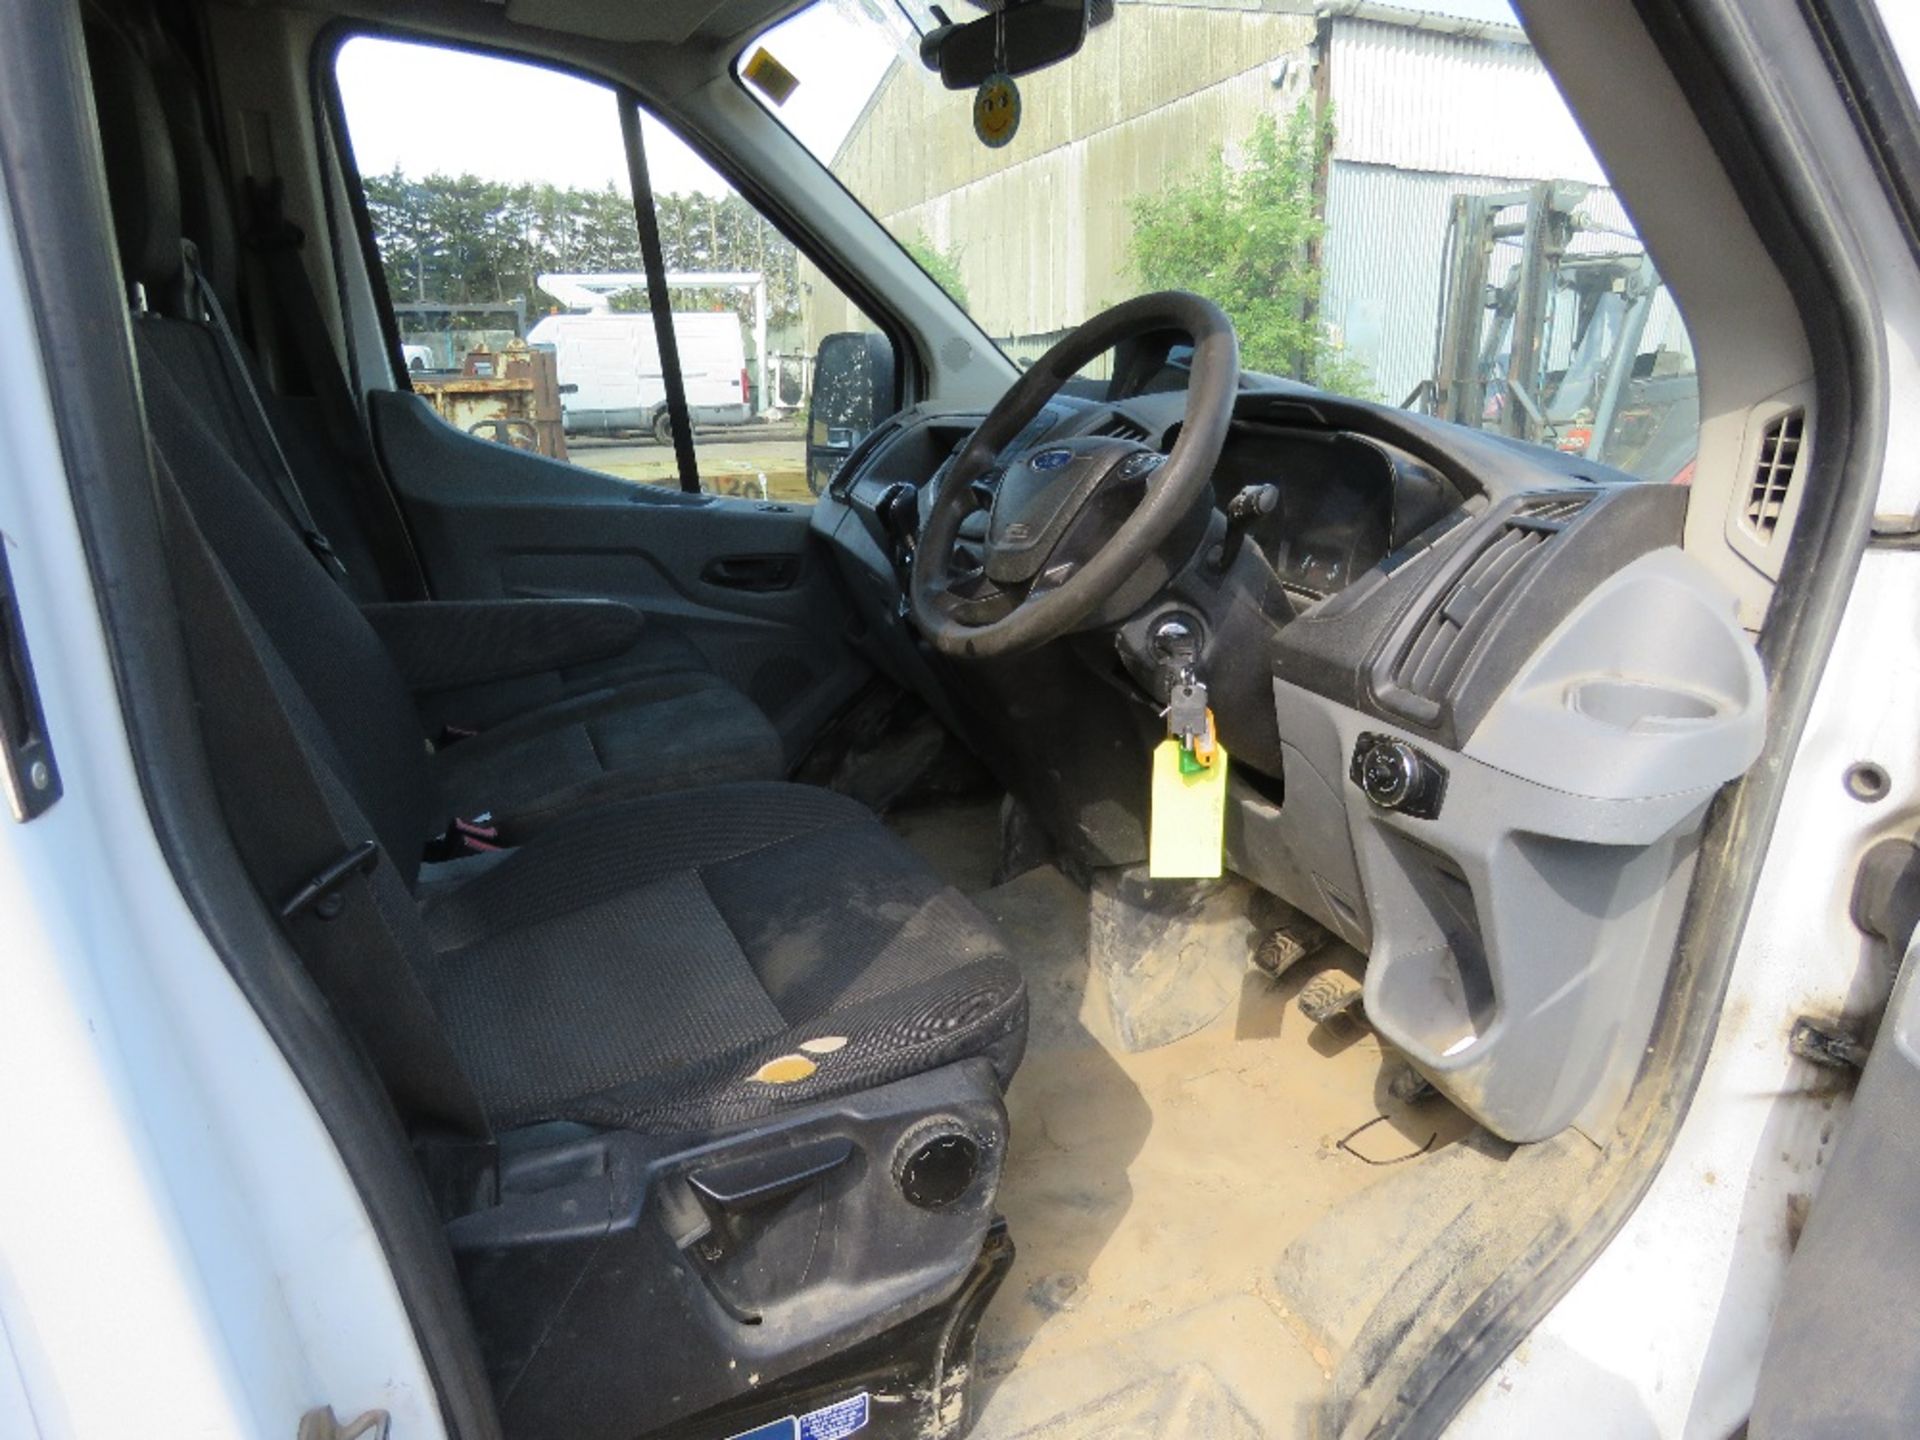 FORD TRANSIT DOUBLE / CREW CAB TIPPER TRUCK REG:AF66 YCG. WITH V5 AND MOT UNTIL 29TH SEPTEMBER 2023. - Image 11 of 17